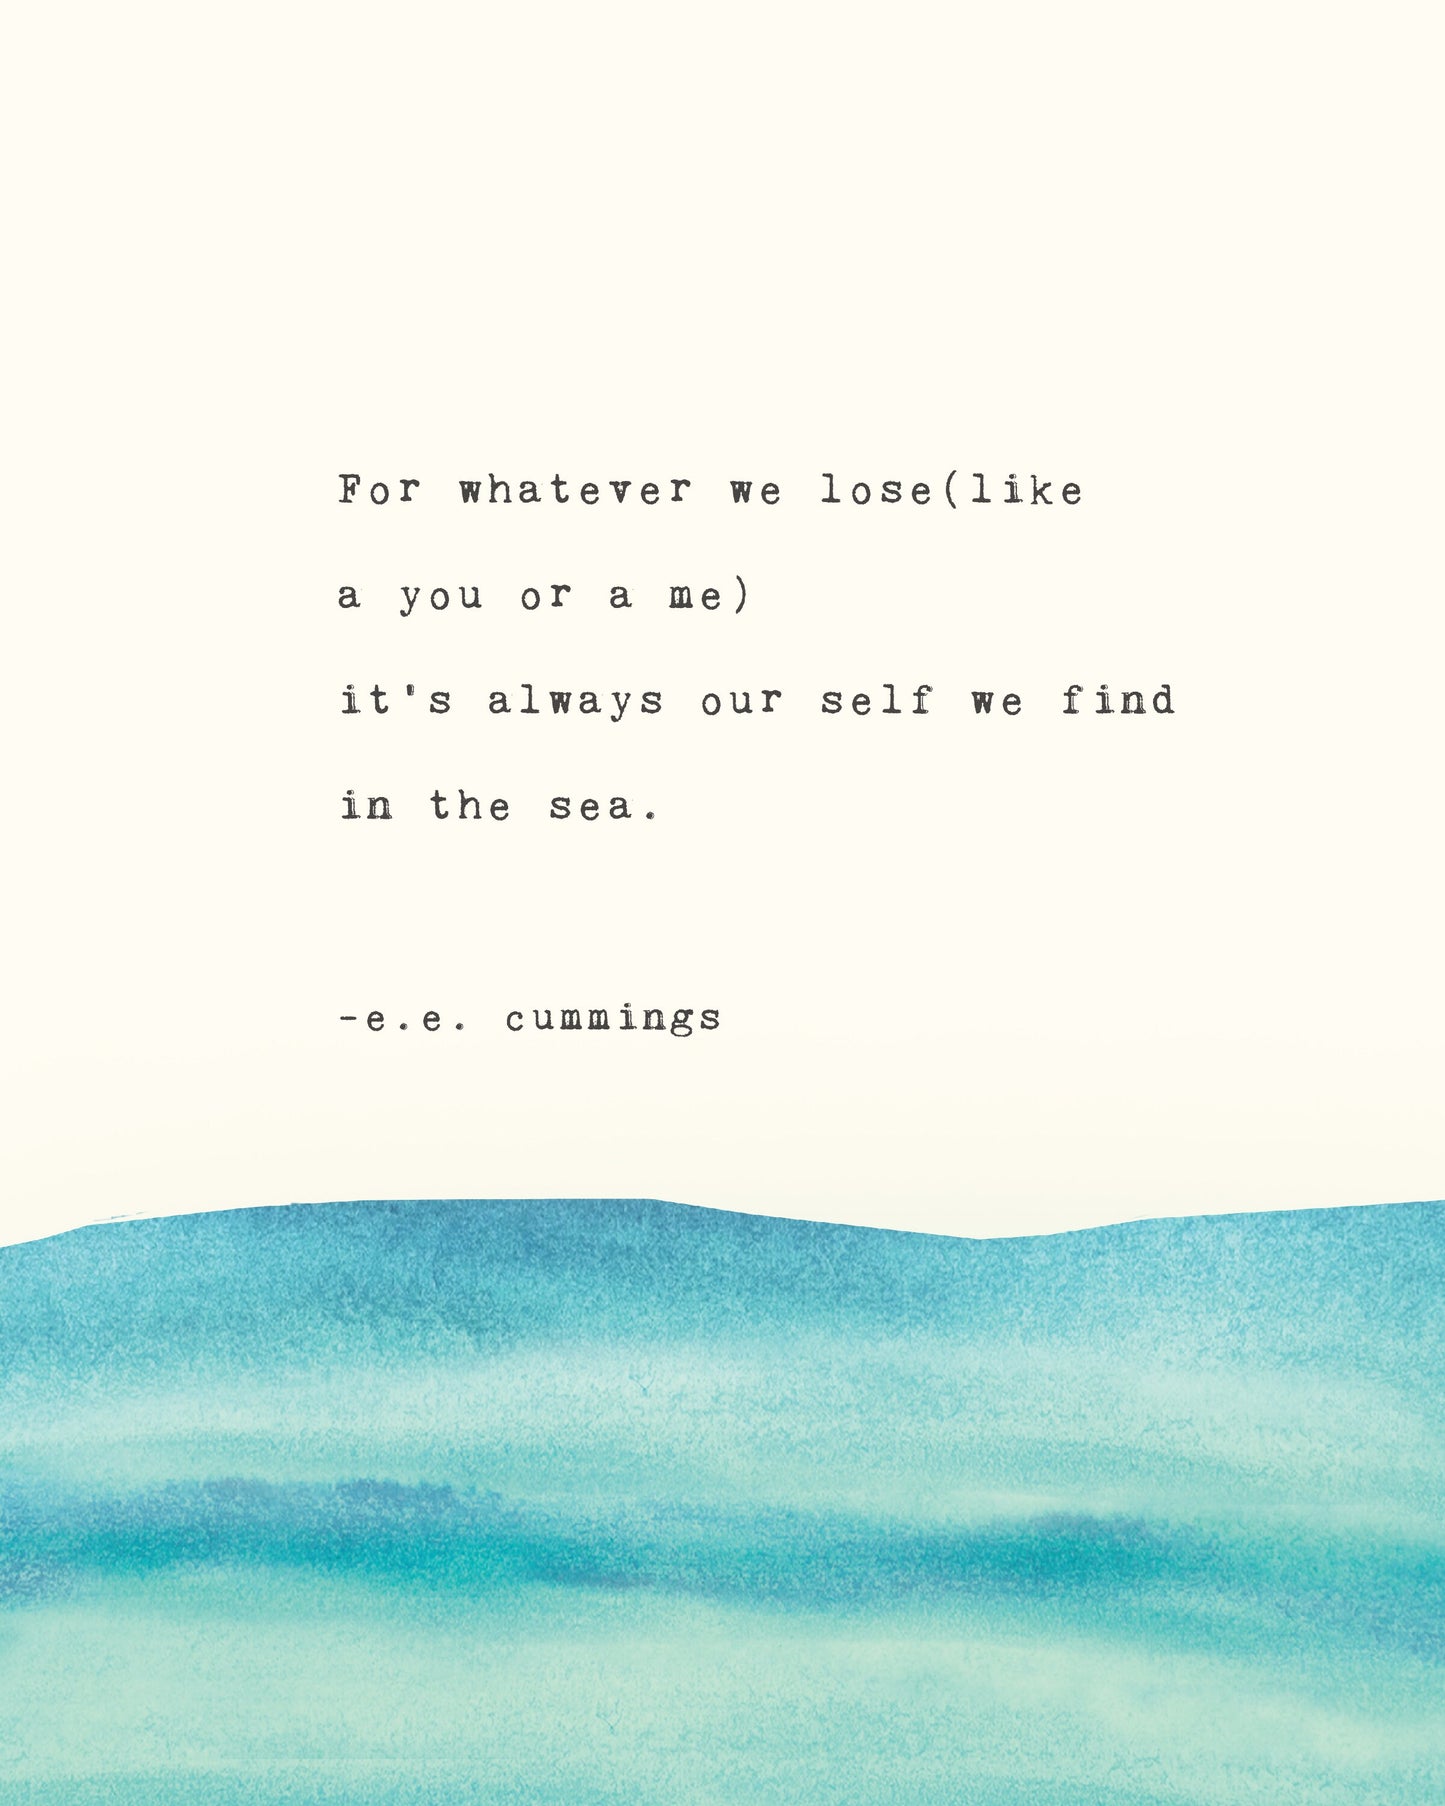 E.E. Cummings poetry art, for whatever we lose (like a you or a me) It's always our self we find in the sea.”